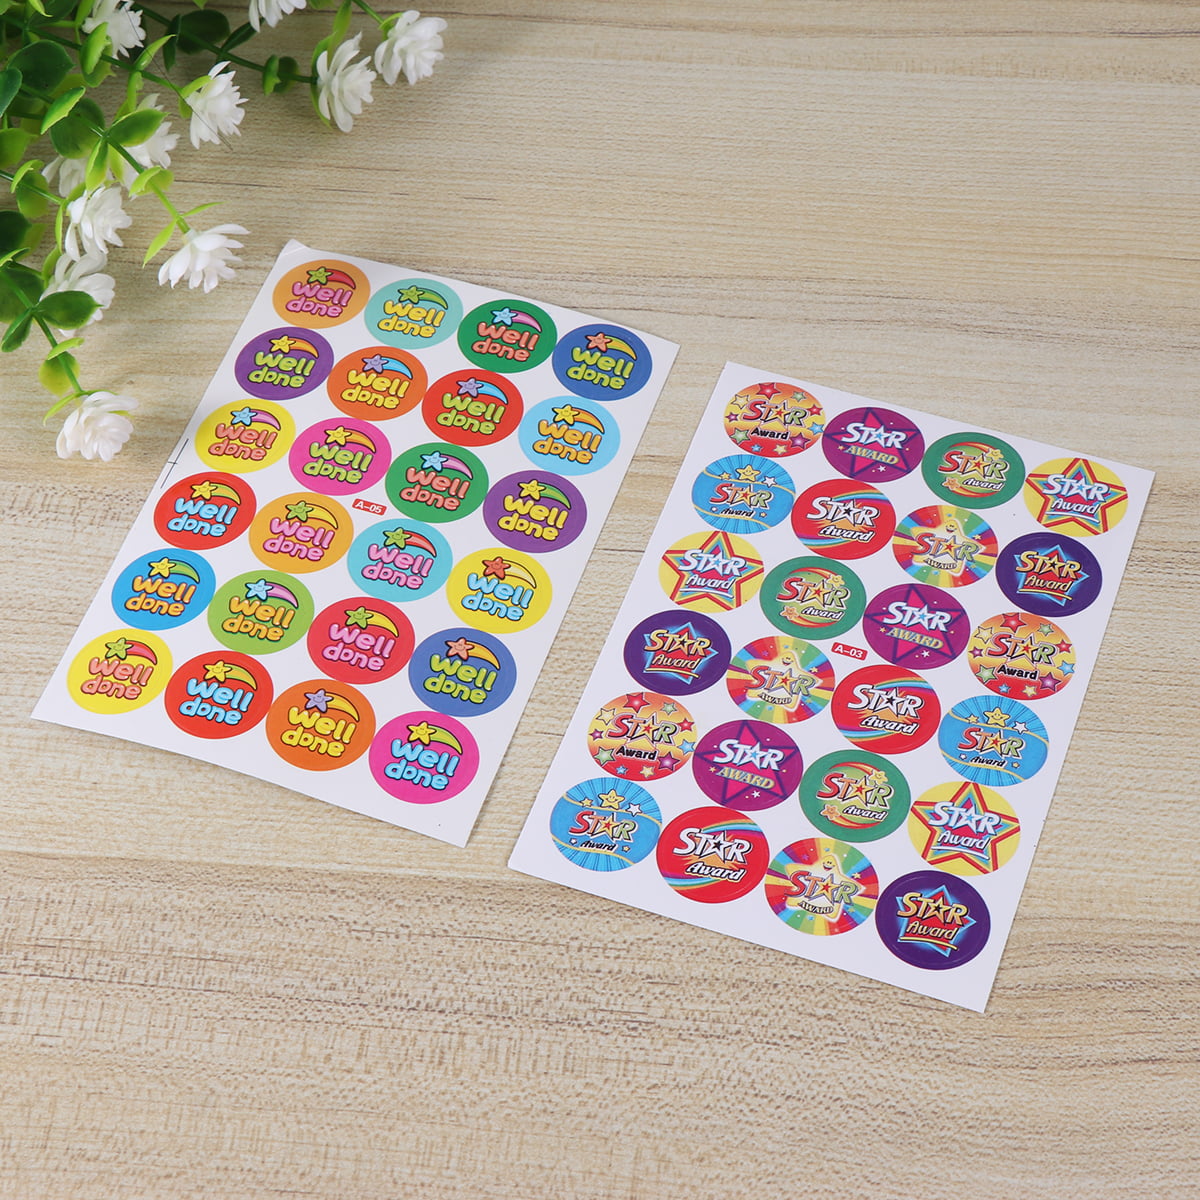 Reward Stickers by Recollections™